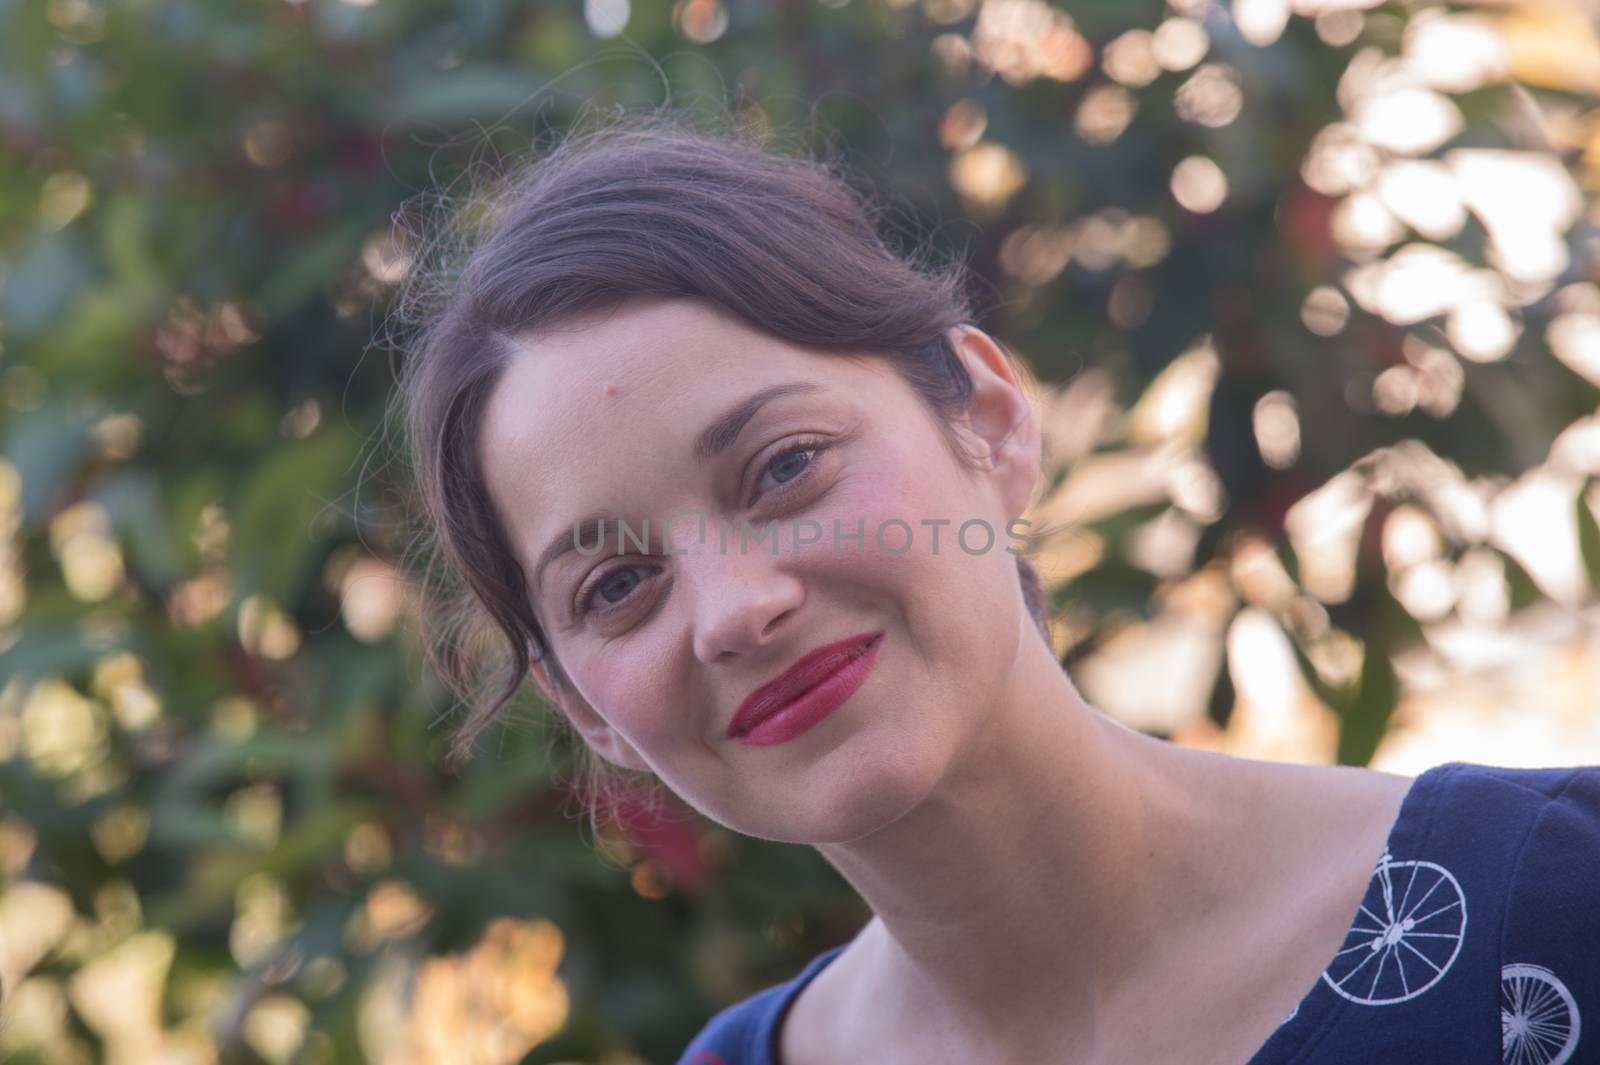 FRANCE, Courbevoie: French actress Marion Cotillard attends Atmosphere Festival in Courbevoie, near Paris, on September 19, 2015.